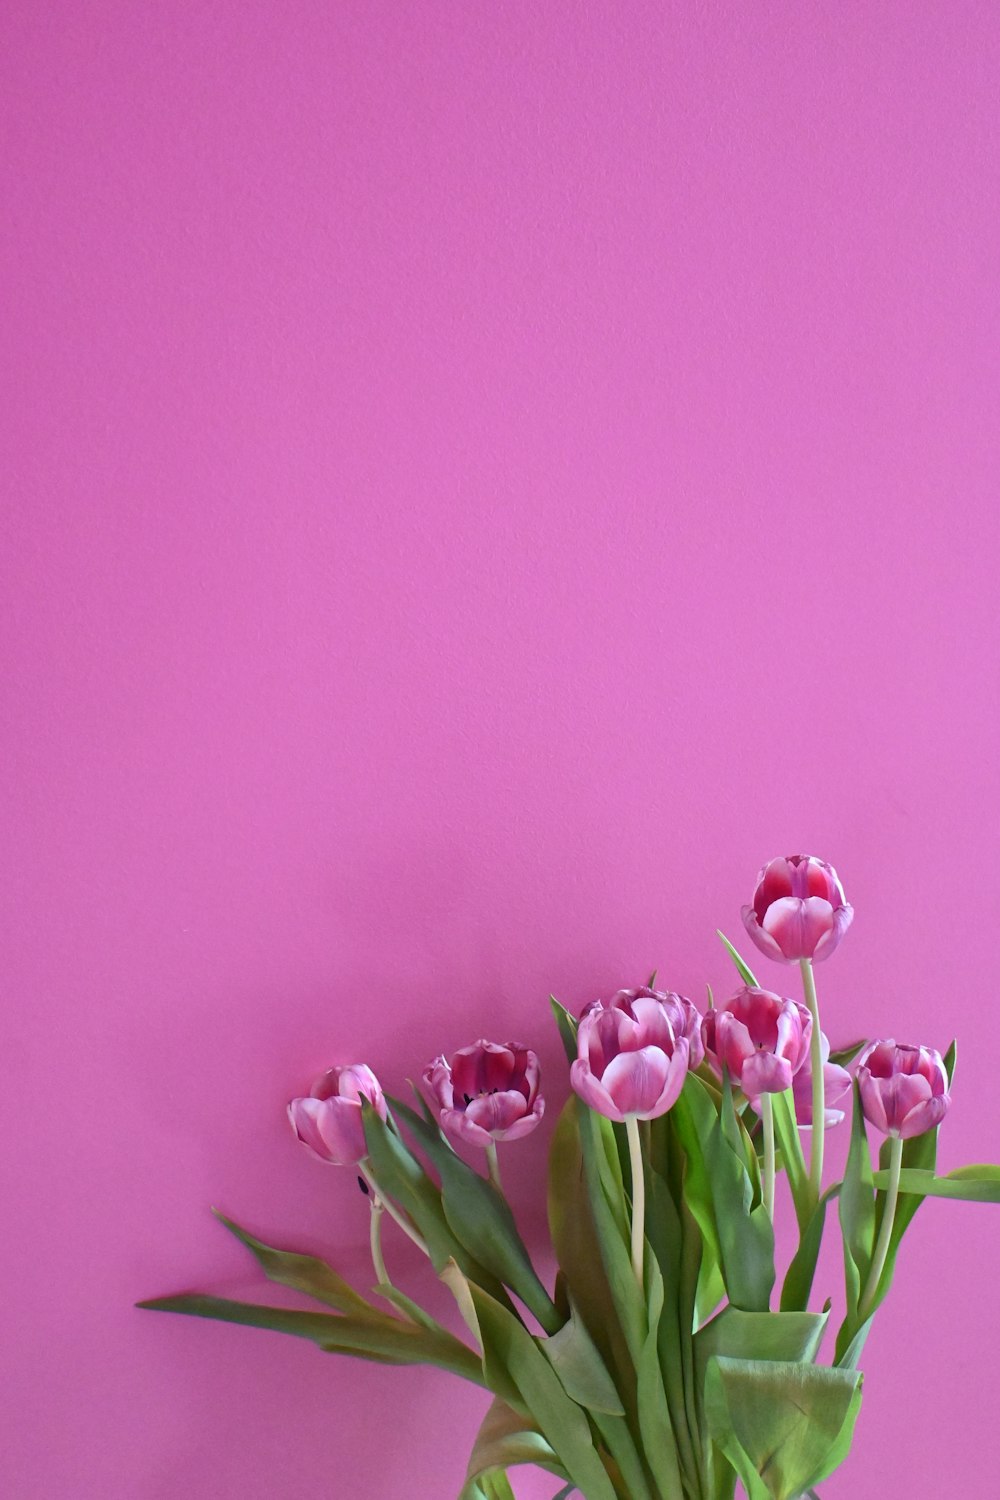 a vase filled with pink flowers against a pink wall